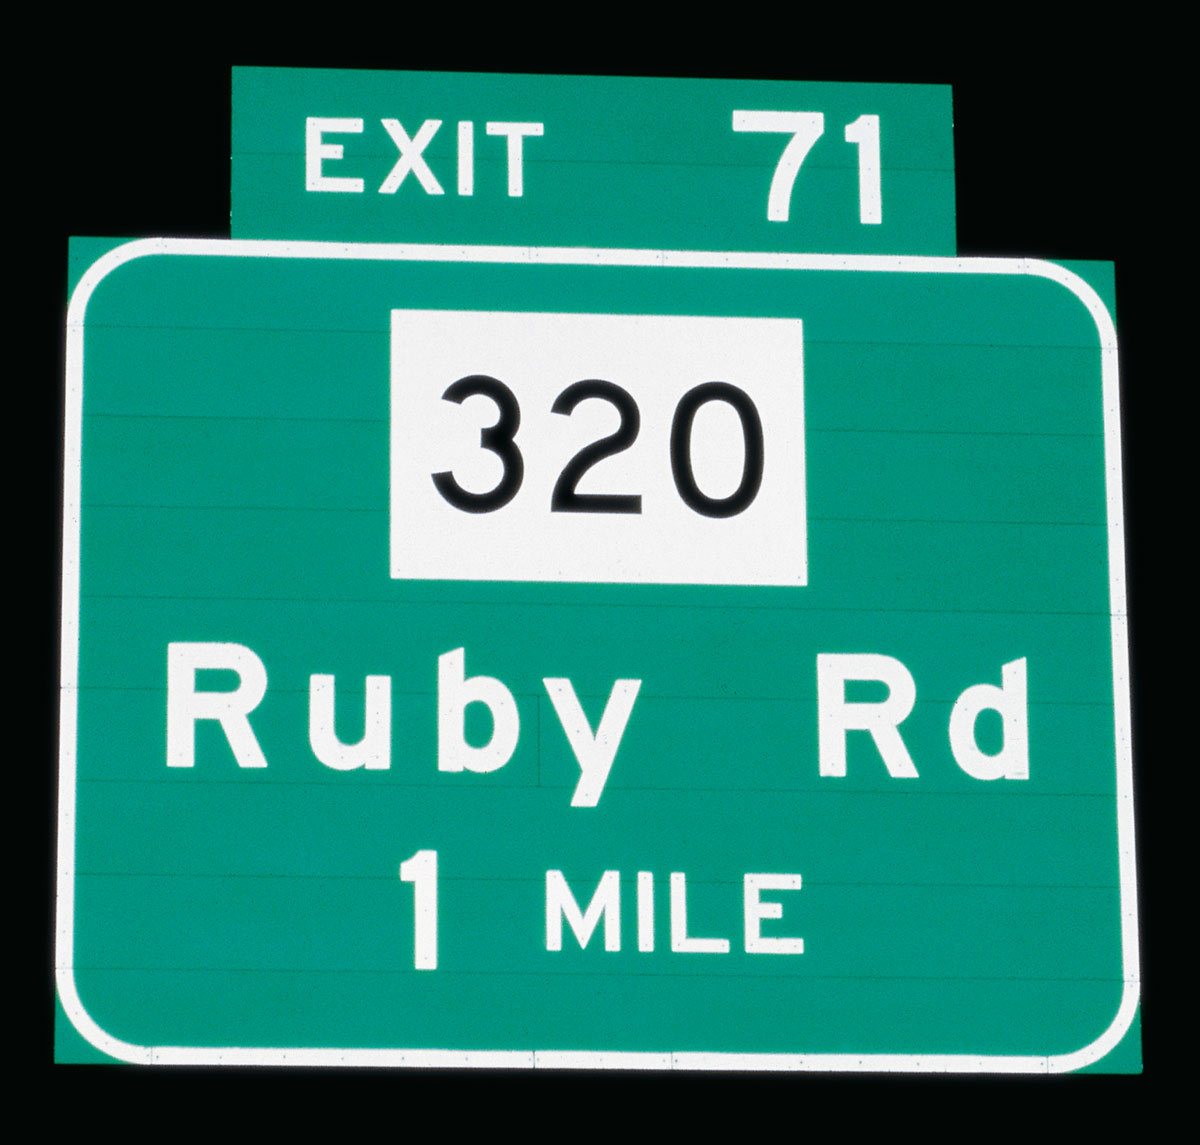 A photograph of a highway exit sign for Ruby Road, exit 71, taken at night.